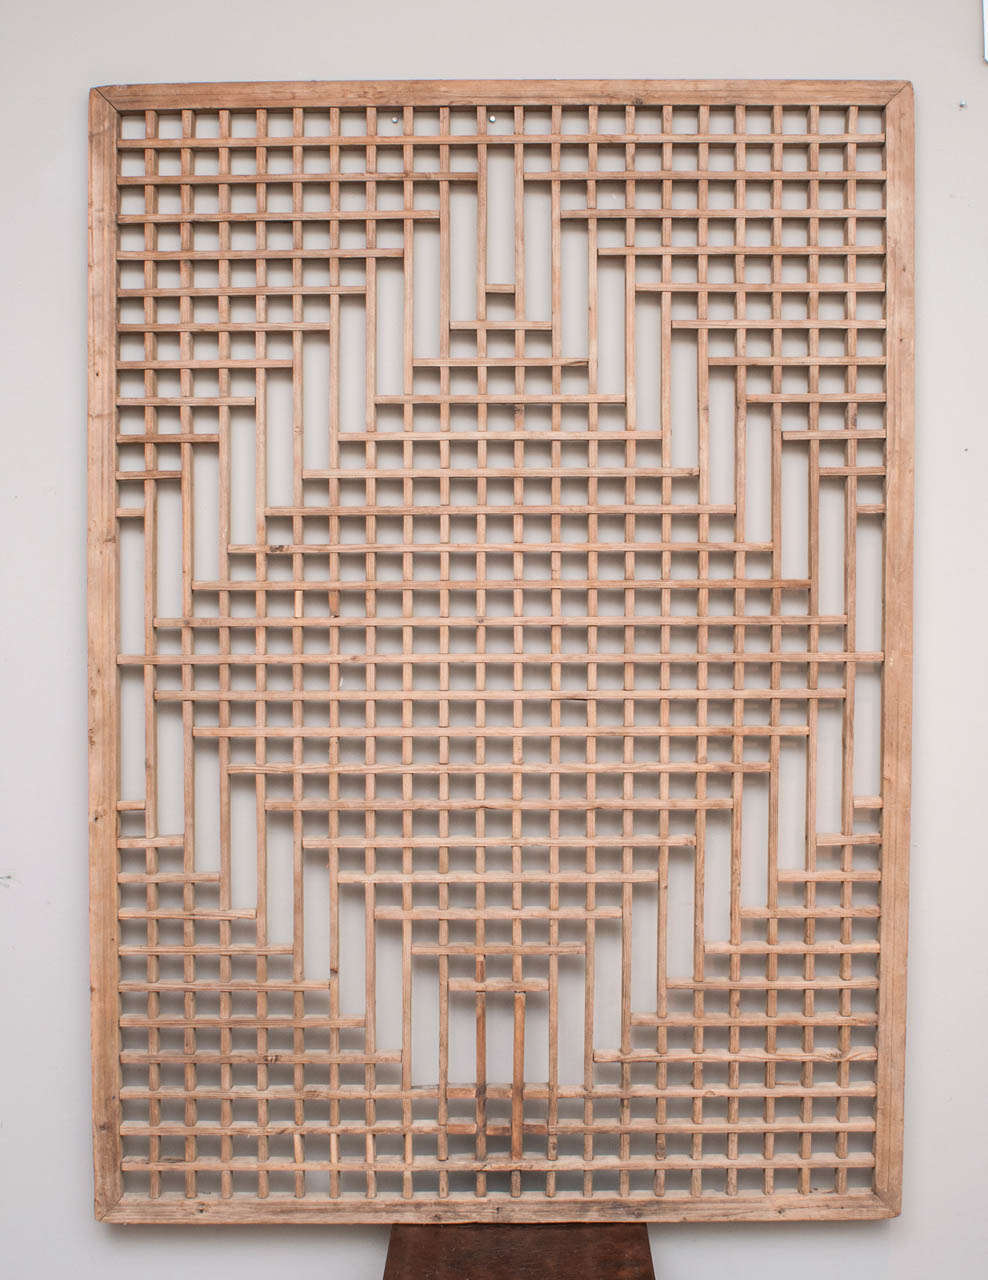 Chinese lattice window panel of minimal geometric design crafted from pale, raw softwood. Stunning when mirrored backing is added.